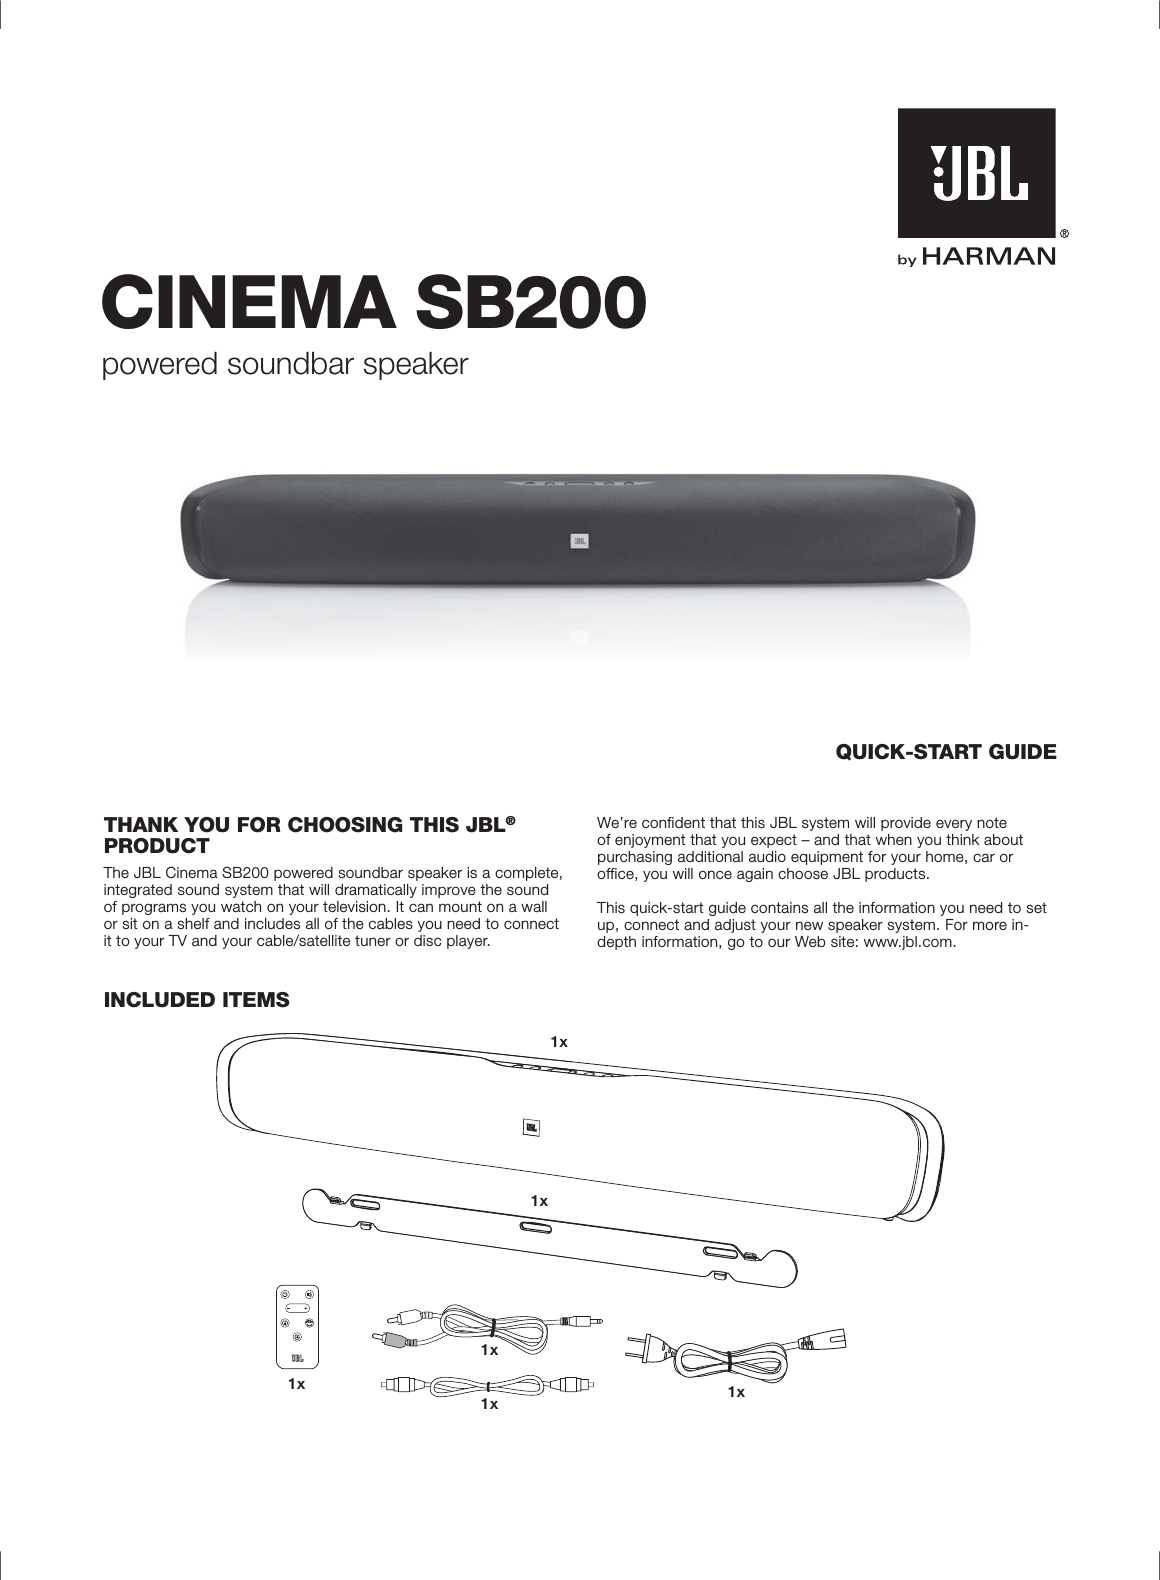 CINEMA SB200powered soundbar speakerQUICK-START GUIDETHANK YOU FOR CHOOSING THIS JBL®PRODUCTThe JBL Cinema SB200 powered soundbar speaker is a complete, integrated sound system that will dramatically improve the sound of programs you watch on your television. It can mount on a wall or sit on a shelf and includes all of the cables you need to connect it to your TV and your cable/satellite tuner or disc player. We’re confident that this JBL system will provide every note of enjoyment that you expect – and that when you think about purchasing additional audio equipment for your home, car or office, you will once again choose JBL products.This quick-start guide contains all the information you need to set up, connect and adjust your new speaker system. For more in-depth information, go to our Web site: www.jbl.com.INCLUDED ITEMSBASS1x1x1x1x 1x1x